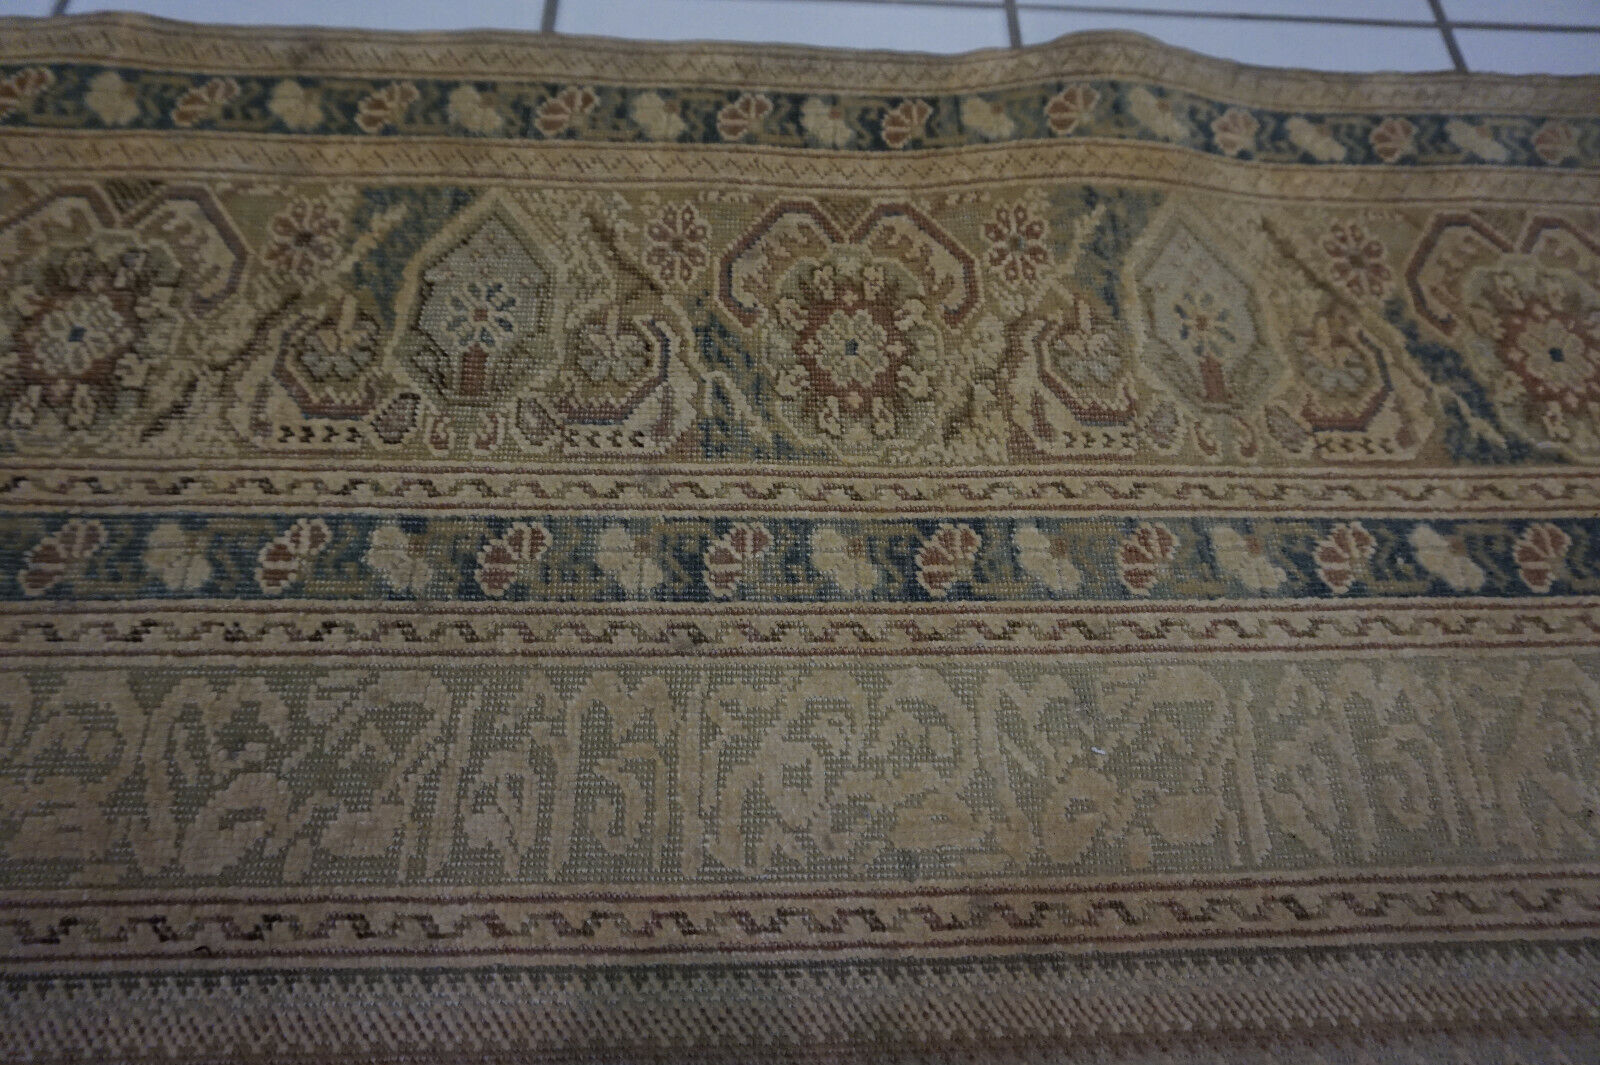 Close-up of the intricate motifs and low pile texture on the Turkish Transilvania prayer rug